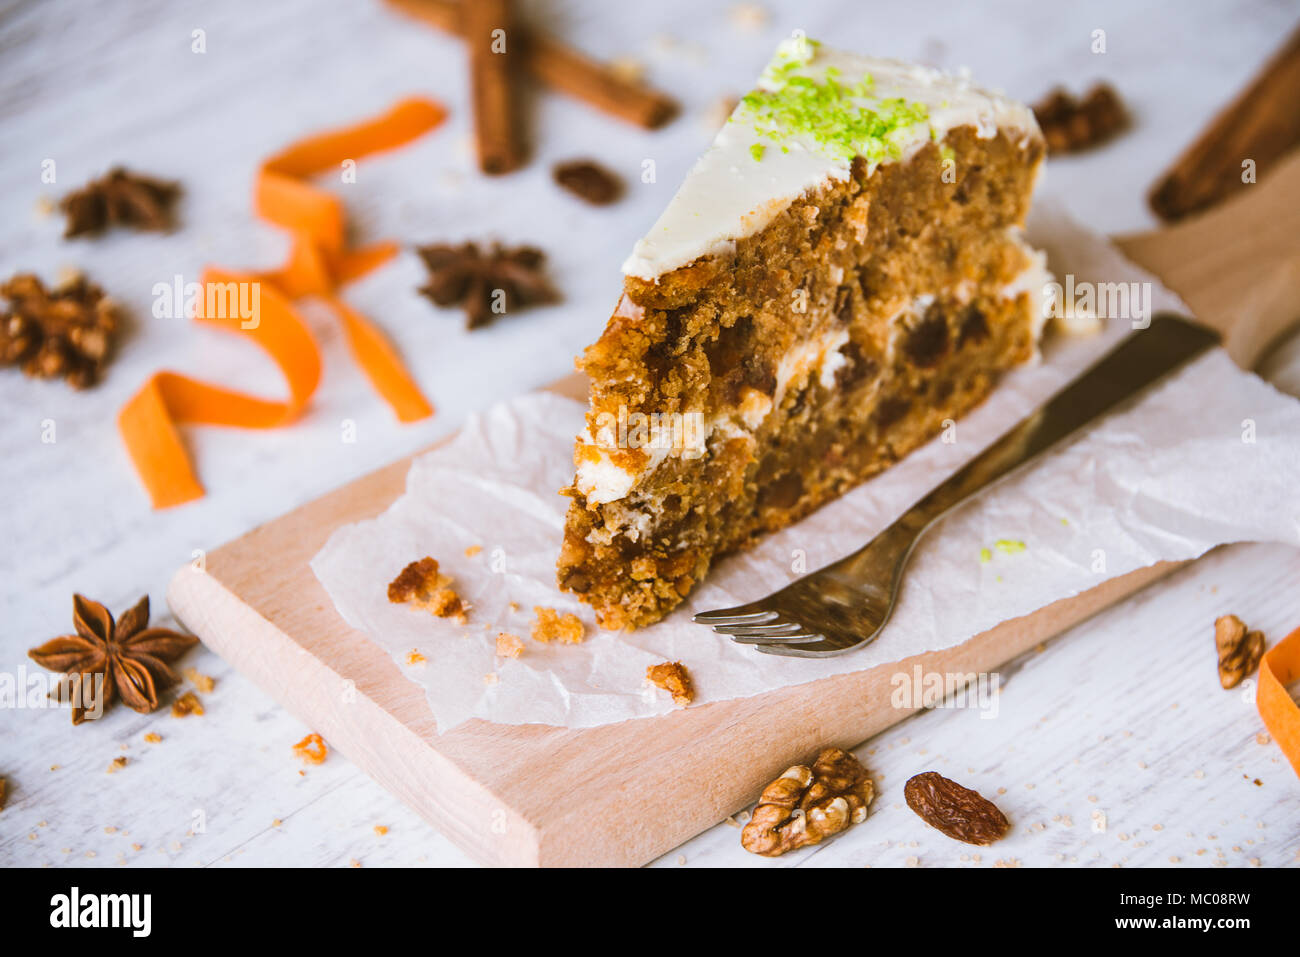 Close up of a homemade carrot cake with raisins, walnuts and cinnamon over white wooden background. Cream cheese frosting. Stock Photo